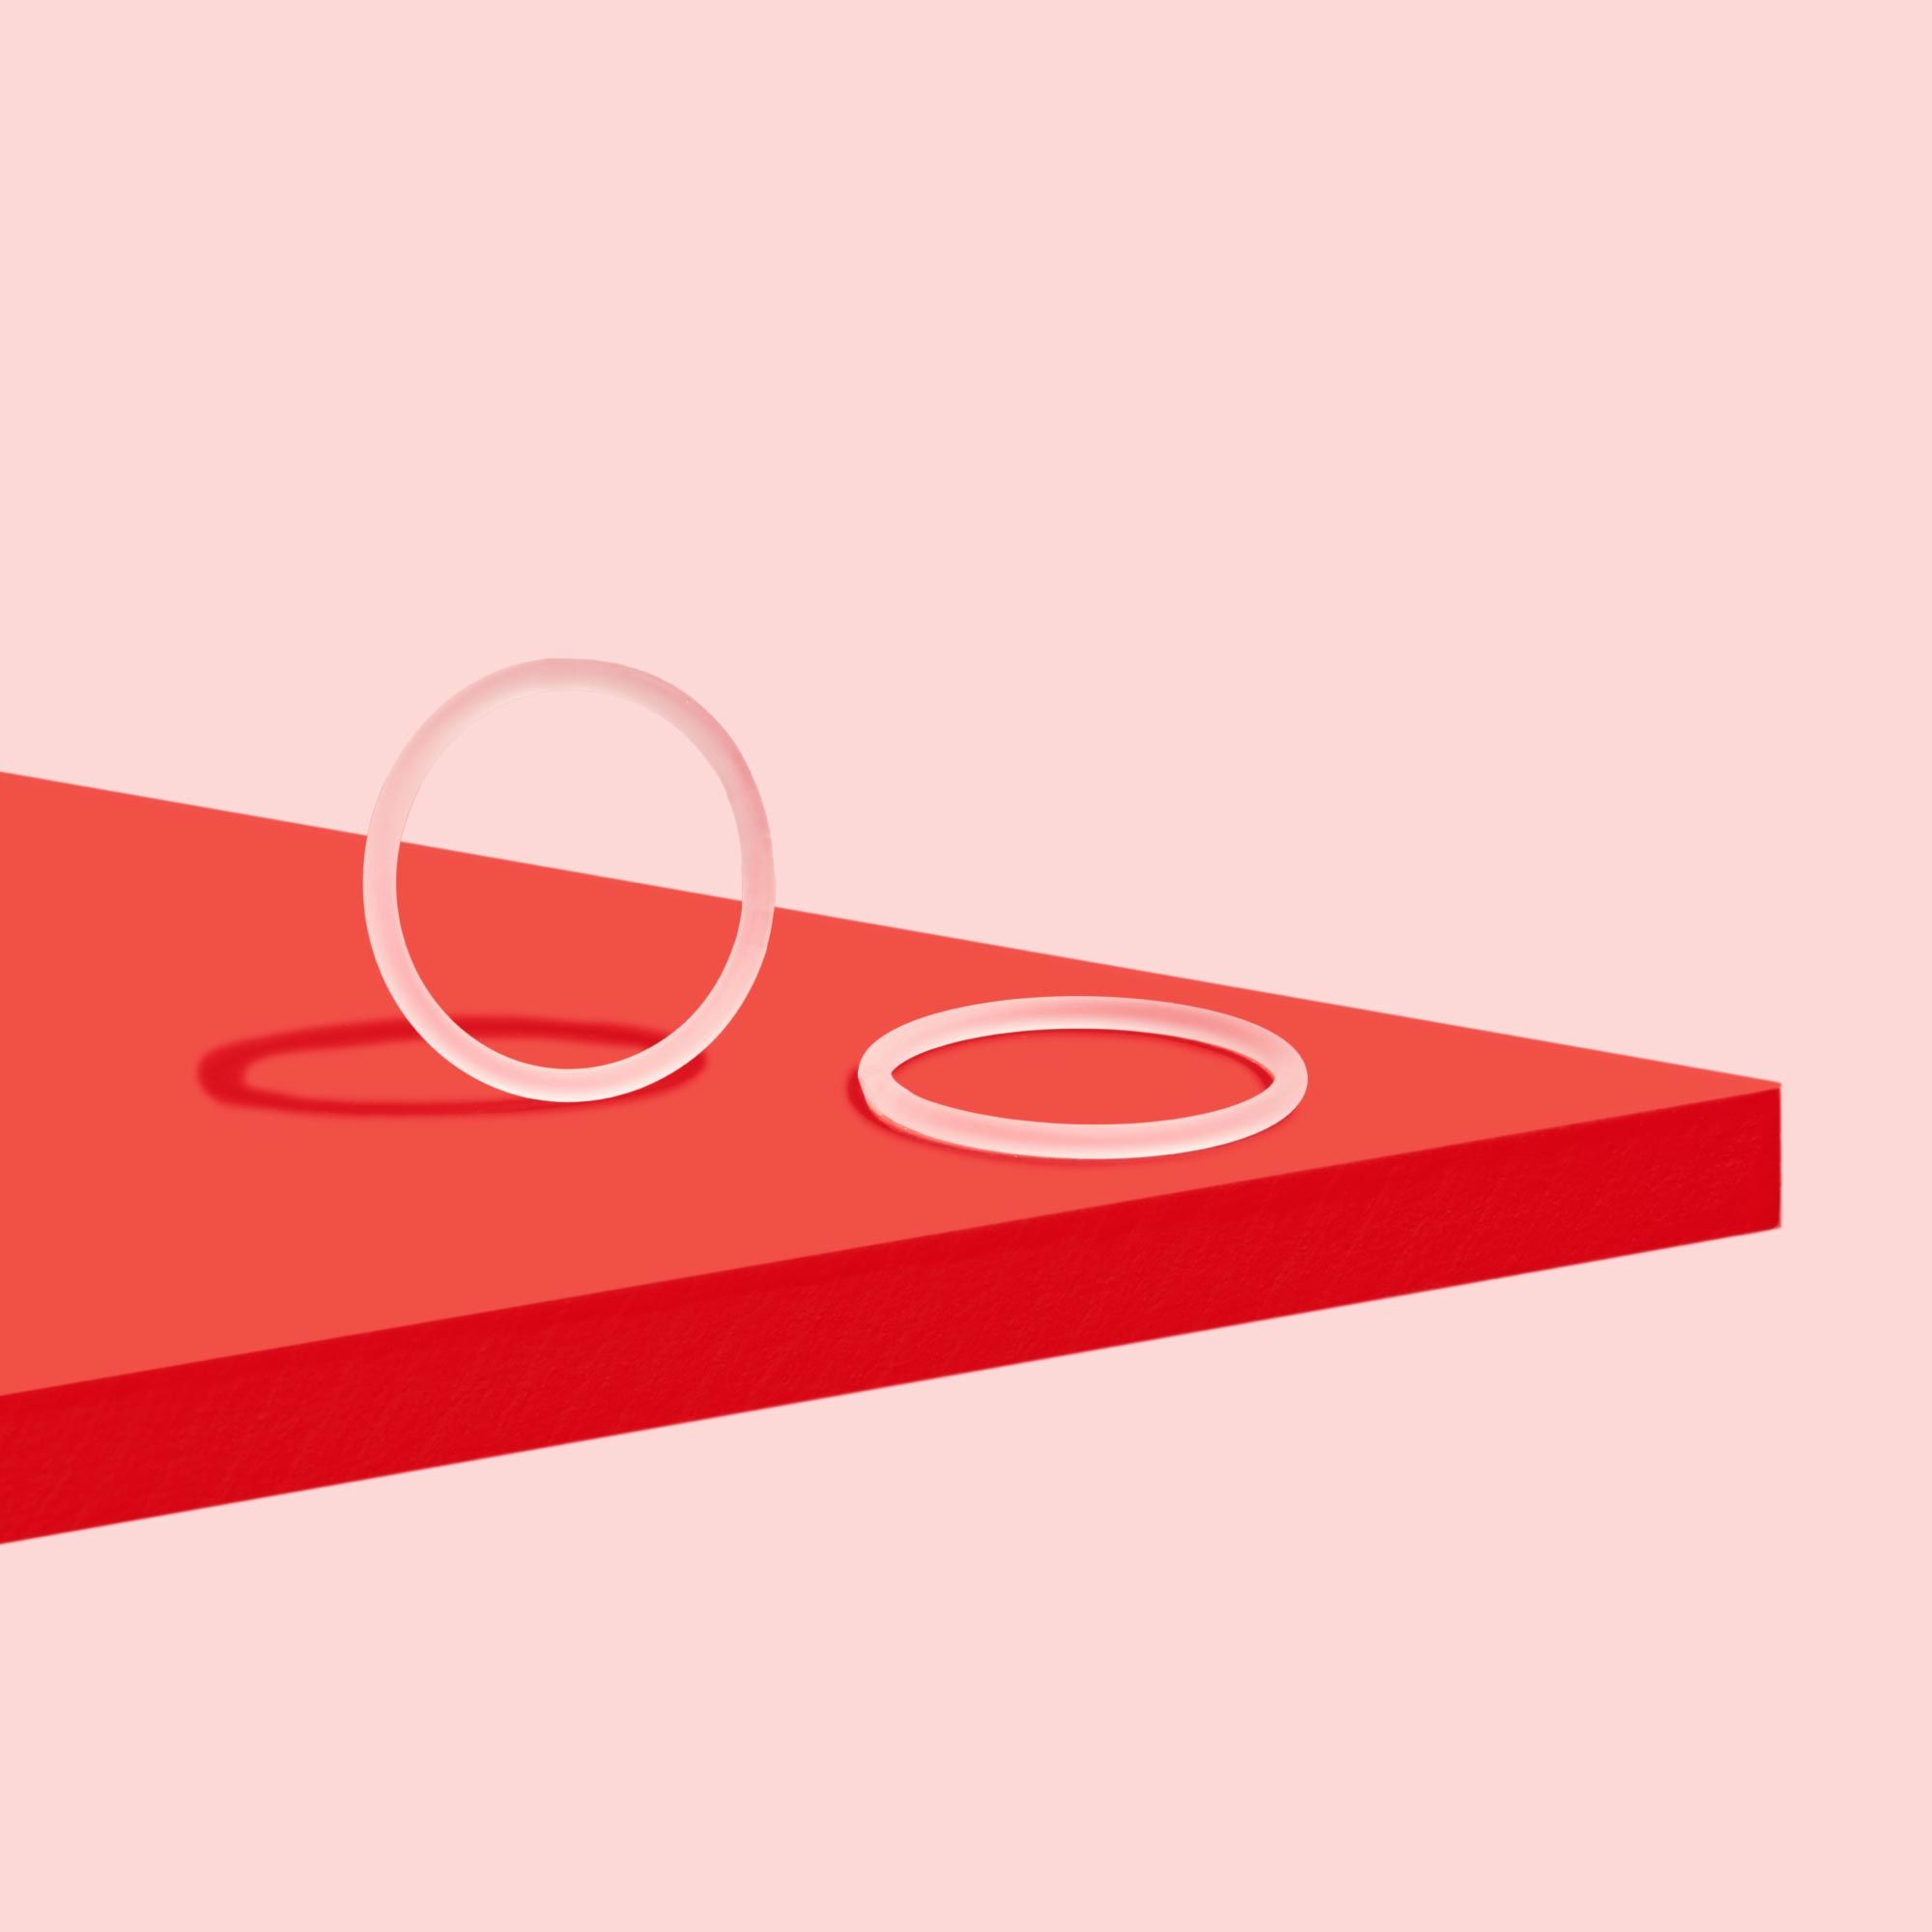 NuvaRing birth control on a red surface with a pink background